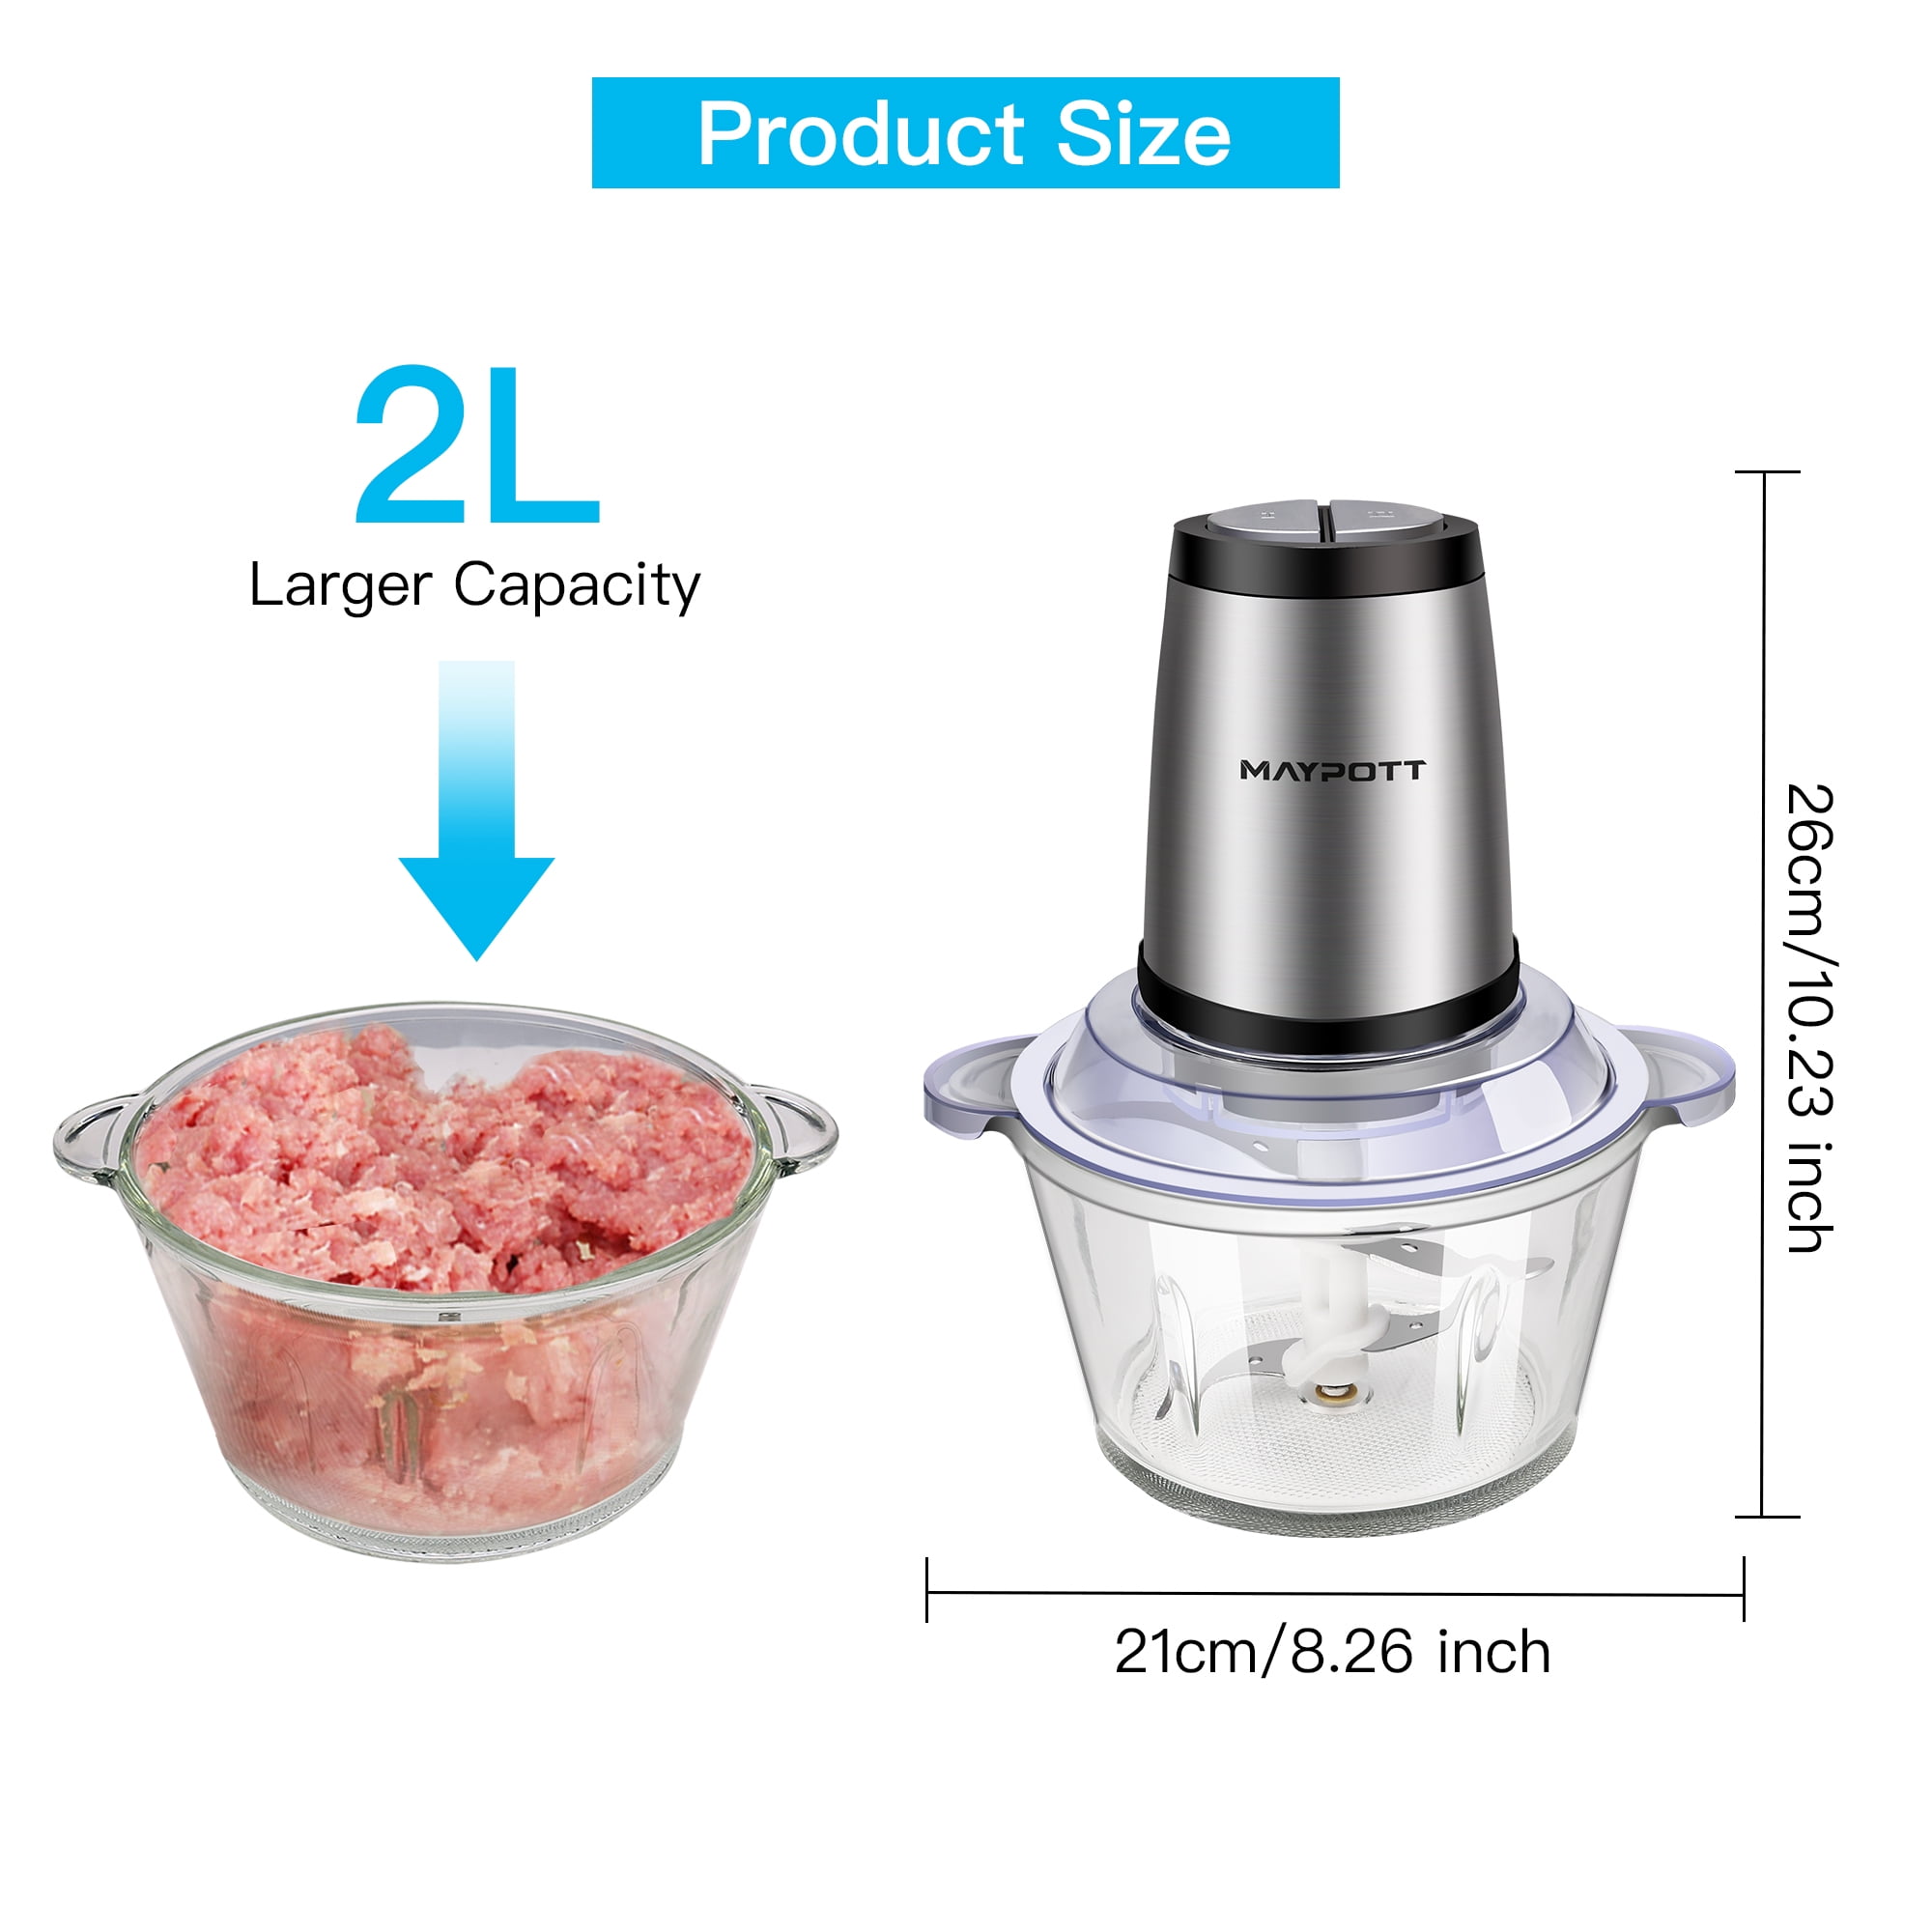 COSTWAY Food Processor & Blender, 500W Professional Food Chopper with 3  Blades, 3-Speed Adjustment, Dual Safety Lock Design, Large Capacity Bowls,  for